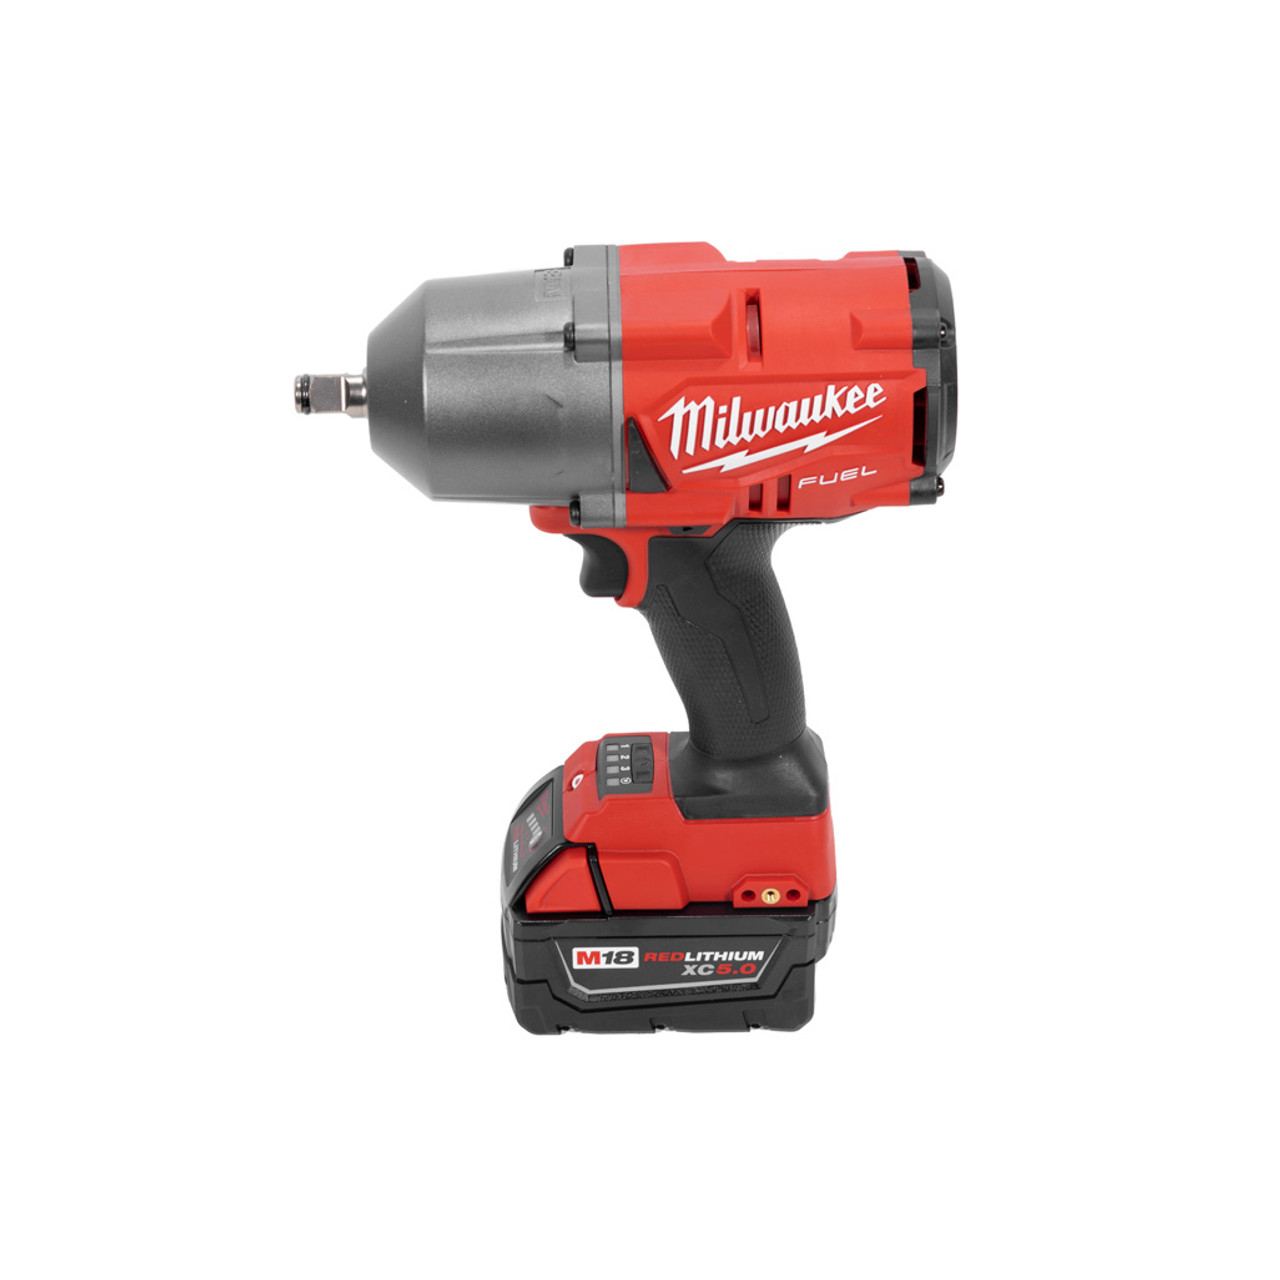 New Milwaukee M18 FUEL 1/2 High Torque 1400 ft-lb Impact Wrench Kit  2767-22